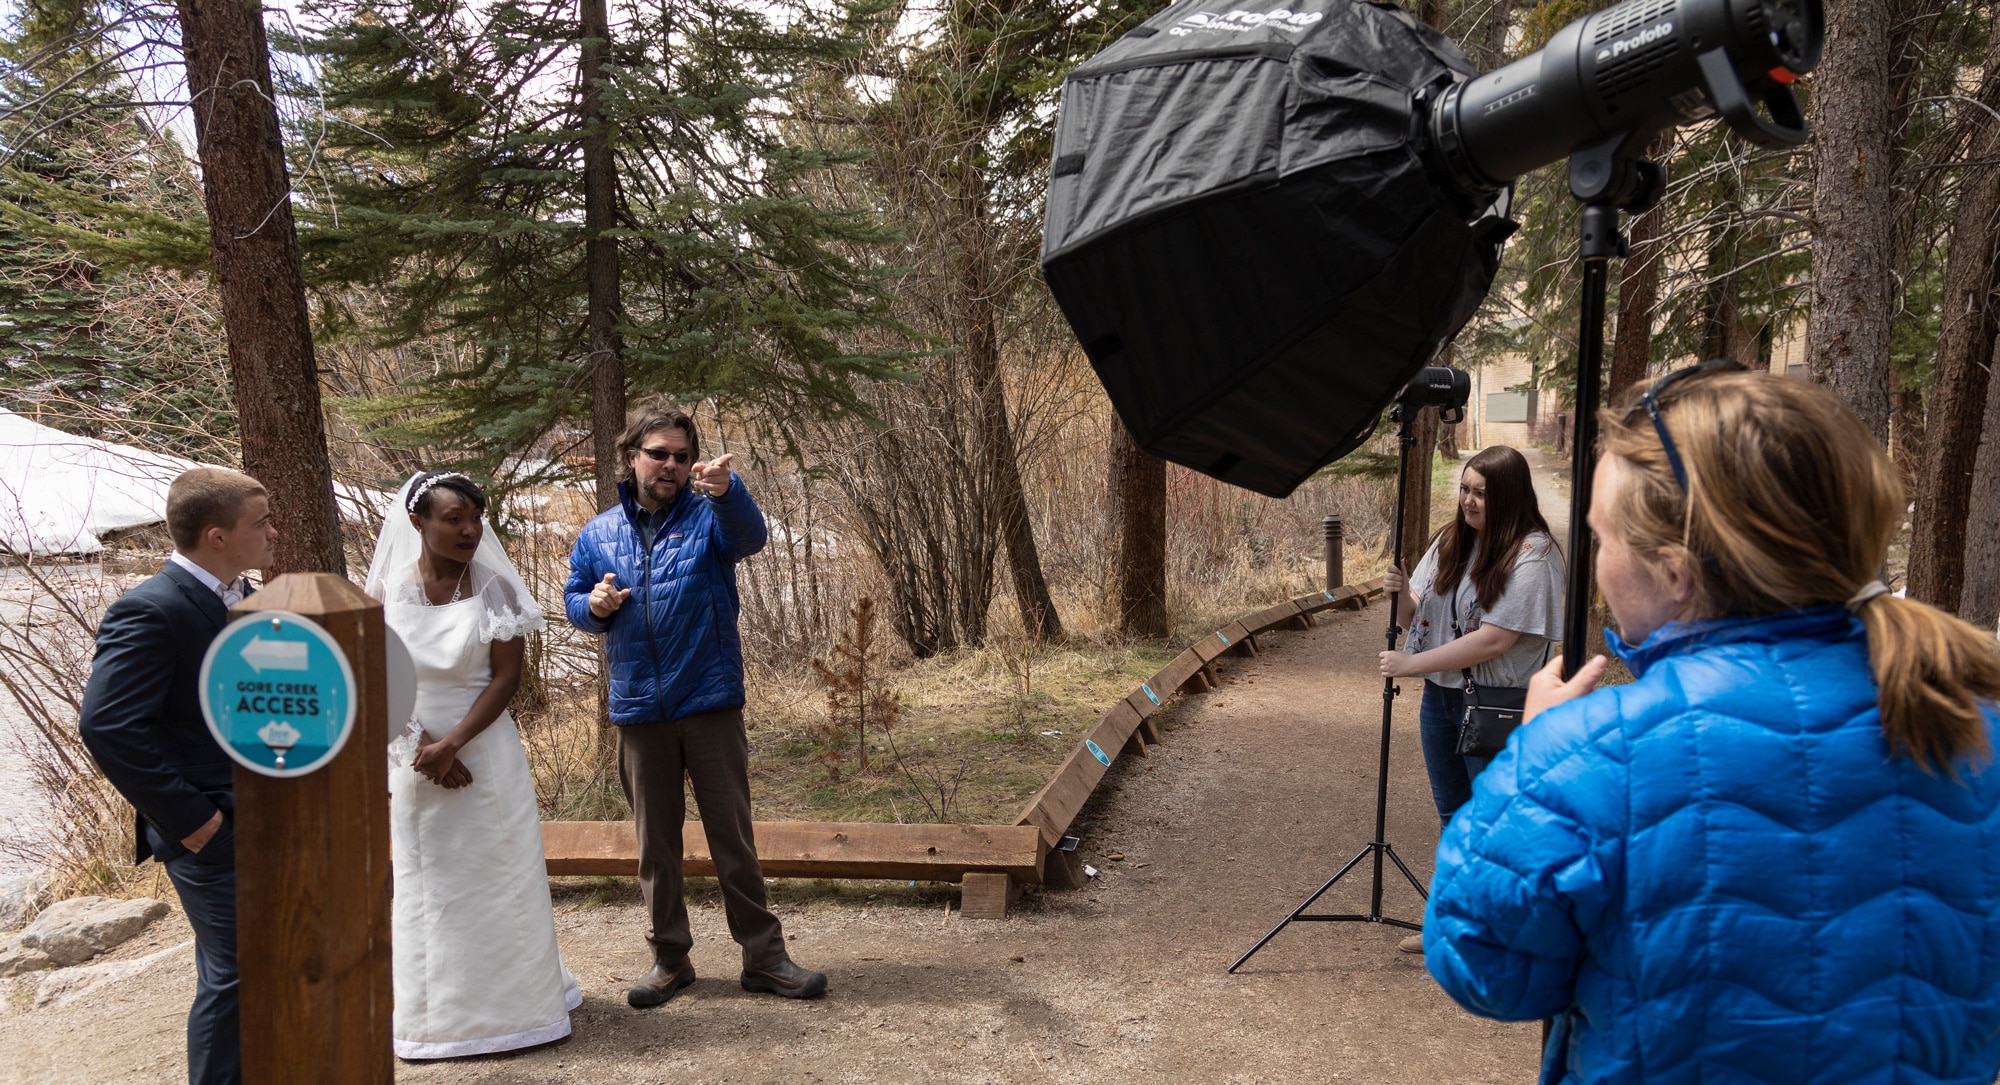 CMC Professional Photography students work on-location with commercial photographer David Gillette.